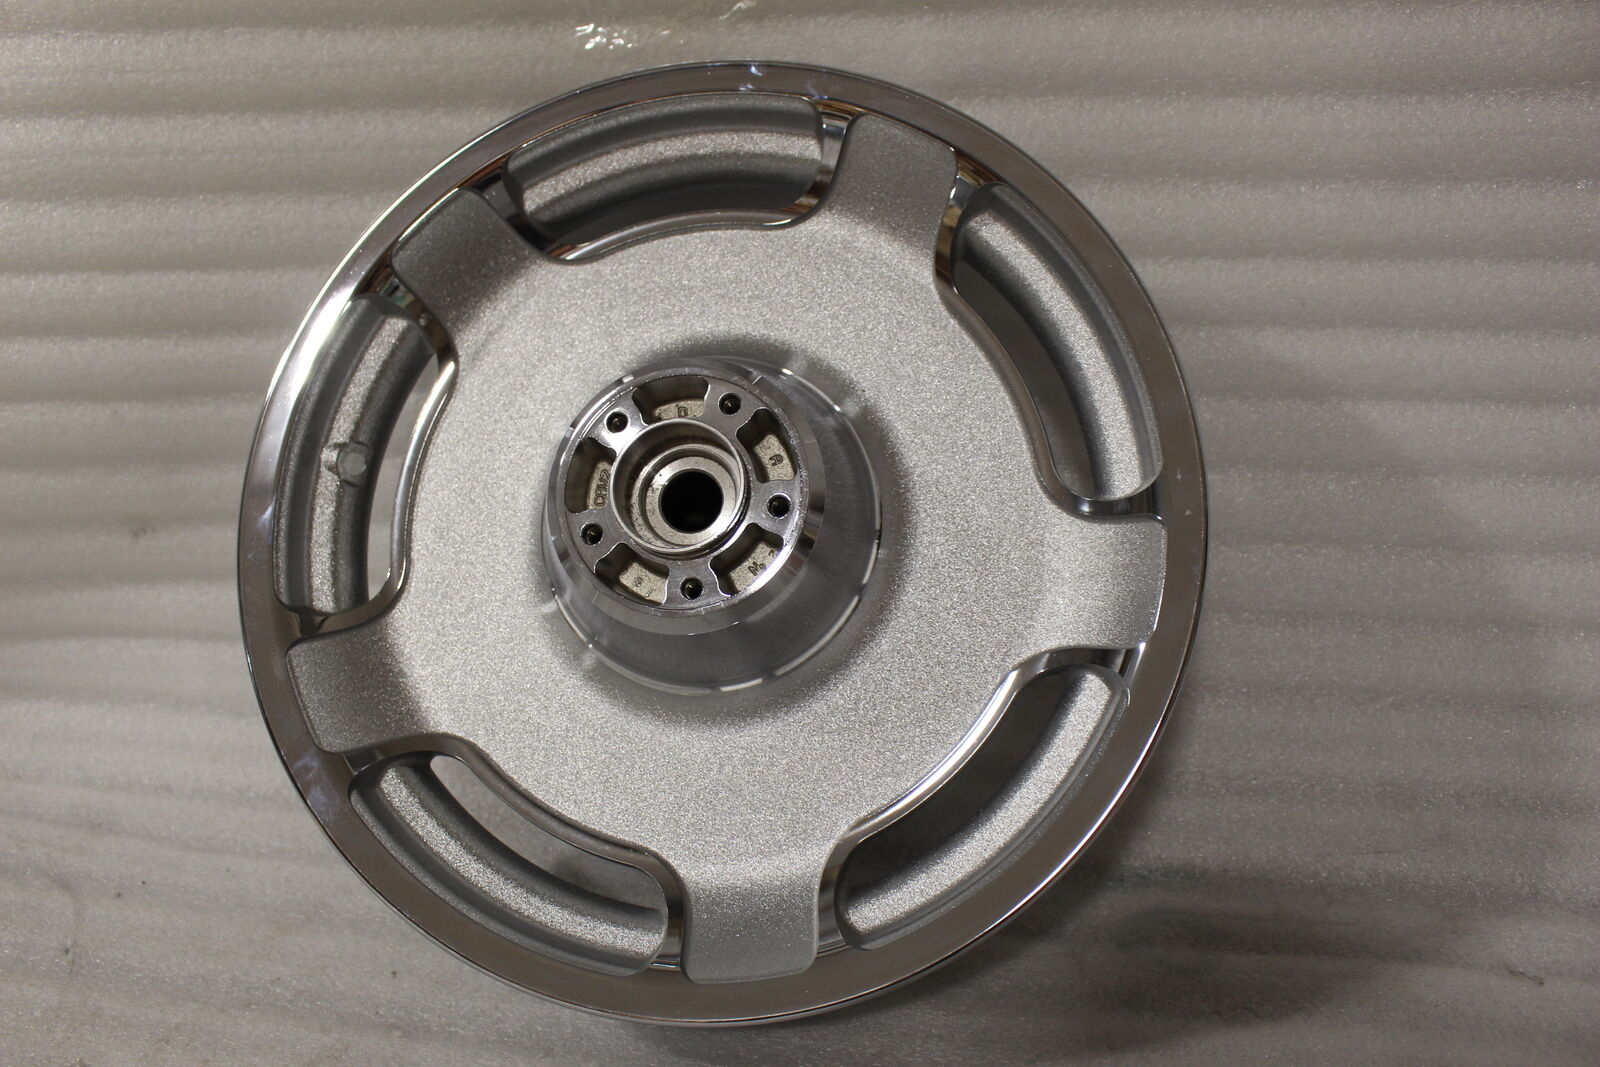 OEM NOS NEW HARLEY TOURING FRONT CHROME CAST WHEEL 16" 41213-04